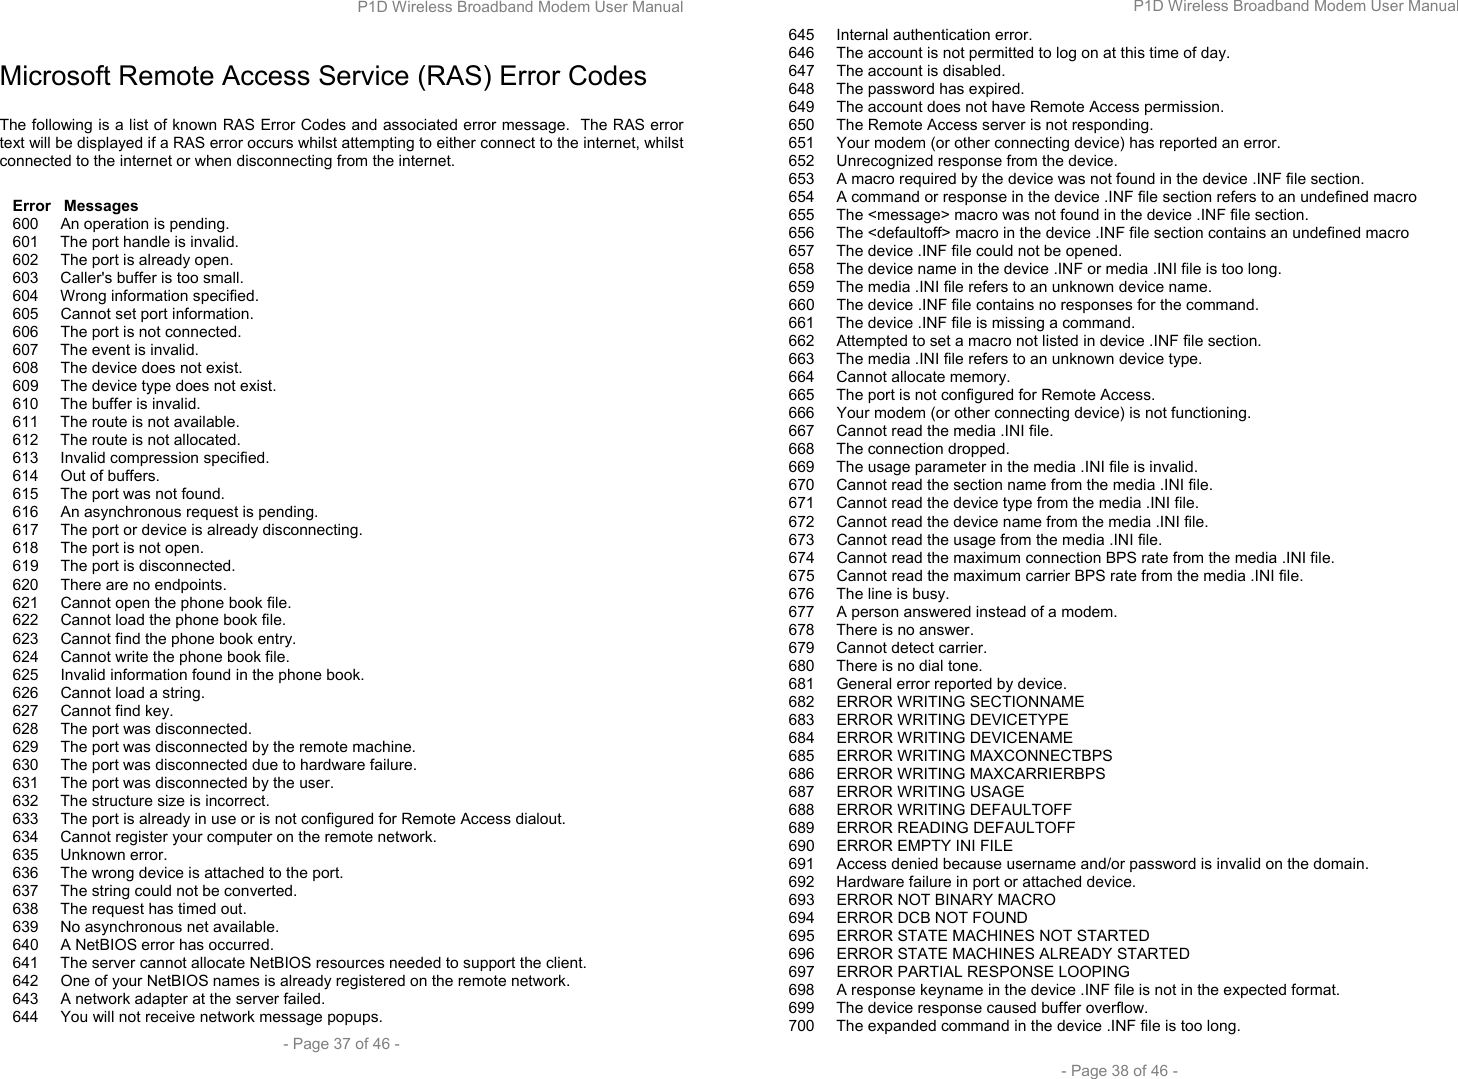 P1D Wireless Broadband Modem User Manual  - Page 37 of 46 -  Microsoft Remote Access Service (RAS) Error Codes   The following is a list of known RAS Error Codes and associated error message.  The RAS error text will be displayed if a RAS error occurs whilst attempting to either connect to the internet, whilst connected to the internet or when disconnecting from the internet.     Error   Messages    600     An operation is pending.    601     The port handle is invalid.    602     The port is already open.    603     Caller&apos;s buffer is too small.    604     Wrong information specified.    605     Cannot set port information.    606     The port is not connected.    607     The event is invalid.    608     The device does not exist.    609     The device type does not exist.    610     The buffer is invalid.    611     The route is not available.    612     The route is not allocated.    613     Invalid compression specified.    614     Out of buffers.    615     The port was not found.    616     An asynchronous request is pending.    617     The port or device is already disconnecting.    618     The port is not open.    619     The port is disconnected.    620     There are no endpoints.    621     Cannot open the phone book file.    622     Cannot load the phone book file.    623     Cannot find the phone book entry.    624     Cannot write the phone book file.    625     Invalid information found in the phone book.    626     Cannot load a string.    627     Cannot find key.    628     The port was disconnected.    629     The port was disconnected by the remote machine.    630     The port was disconnected due to hardware failure.    631     The port was disconnected by the user.    632     The structure size is incorrect.    633     The port is already in use or is not configured for Remote Access dialout.    634     Cannot register your computer on the remote network.    635     Unknown error.    636     The wrong device is attached to the port.    637     The string could not be converted.    638     The request has timed out.    639     No asynchronous net available.    640     A NetBIOS error has occurred.    641     The server cannot allocate NetBIOS resources needed to support the client.    642     One of your NetBIOS names is already registered on the remote network.    643     A network adapter at the server failed.    644     You will not receive network message popups. P1D Wireless Broadband Modem User Manual  - Page 38 of 46 -    645     Internal authentication error.    646     The account is not permitted to log on at this time of day.    647     The account is disabled.    648     The password has expired.    649     The account does not have Remote Access permission.    650     The Remote Access server is not responding.    651     Your modem (or other connecting device) has reported an error.    652     Unrecognized response from the device.    653     A macro required by the device was not found in the device .INF file section.    654     A command or response in the device .INF file section refers to an undefined macro    655     The &lt;message&gt; macro was not found in the device .INF file section.    656     The &lt;defaultoff&gt; macro in the device .INF file section contains an undefined macro    657     The device .INF file could not be opened.    658     The device name in the device .INF or media .INI file is too long.    659     The media .INI file refers to an unknown device name.    660     The device .INF file contains no responses for the command.    661     The device .INF file is missing a command.    662     Attempted to set a macro not listed in device .INF file section.    663     The media .INI file refers to an unknown device type.    664     Cannot allocate memory.    665     The port is not configured for Remote Access.    666     Your modem (or other connecting device) is not functioning.    667     Cannot read the media .INI file.    668     The connection dropped.    669     The usage parameter in the media .INI file is invalid.    670     Cannot read the section name from the media .INI file.    671     Cannot read the device type from the media .INI file.    672     Cannot read the device name from the media .INI file.    673     Cannot read the usage from the media .INI file.    674     Cannot read the maximum connection BPS rate from the media .INI file.    675     Cannot read the maximum carrier BPS rate from the media .INI file.    676     The line is busy.    677     A person answered instead of a modem.    678     There is no answer.    679     Cannot detect carrier.    680     There is no dial tone.    681     General error reported by device.    682     ERROR WRITING SECTIONNAME    683     ERROR WRITING DEVICETYPE    684     ERROR WRITING DEVICENAME    685     ERROR WRITING MAXCONNECTBPS    686     ERROR WRITING MAXCARRIERBPS    687     ERROR WRITING USAGE    688     ERROR WRITING DEFAULTOFF    689     ERROR READING DEFAULTOFF    690     ERROR EMPTY INI FILE    691     Access denied because username and/or password is invalid on the domain.    692     Hardware failure in port or attached device.    693     ERROR NOT BINARY MACRO    694     ERROR DCB NOT FOUND    695     ERROR STATE MACHINES NOT STARTED    696     ERROR STATE MACHINES ALREADY STARTED    697     ERROR PARTIAL RESPONSE LOOPING    698     A response keyname in the device .INF file is not in the expected format.    699     The device response caused buffer overflow.    700     The expanded command in the device .INF file is too long. 